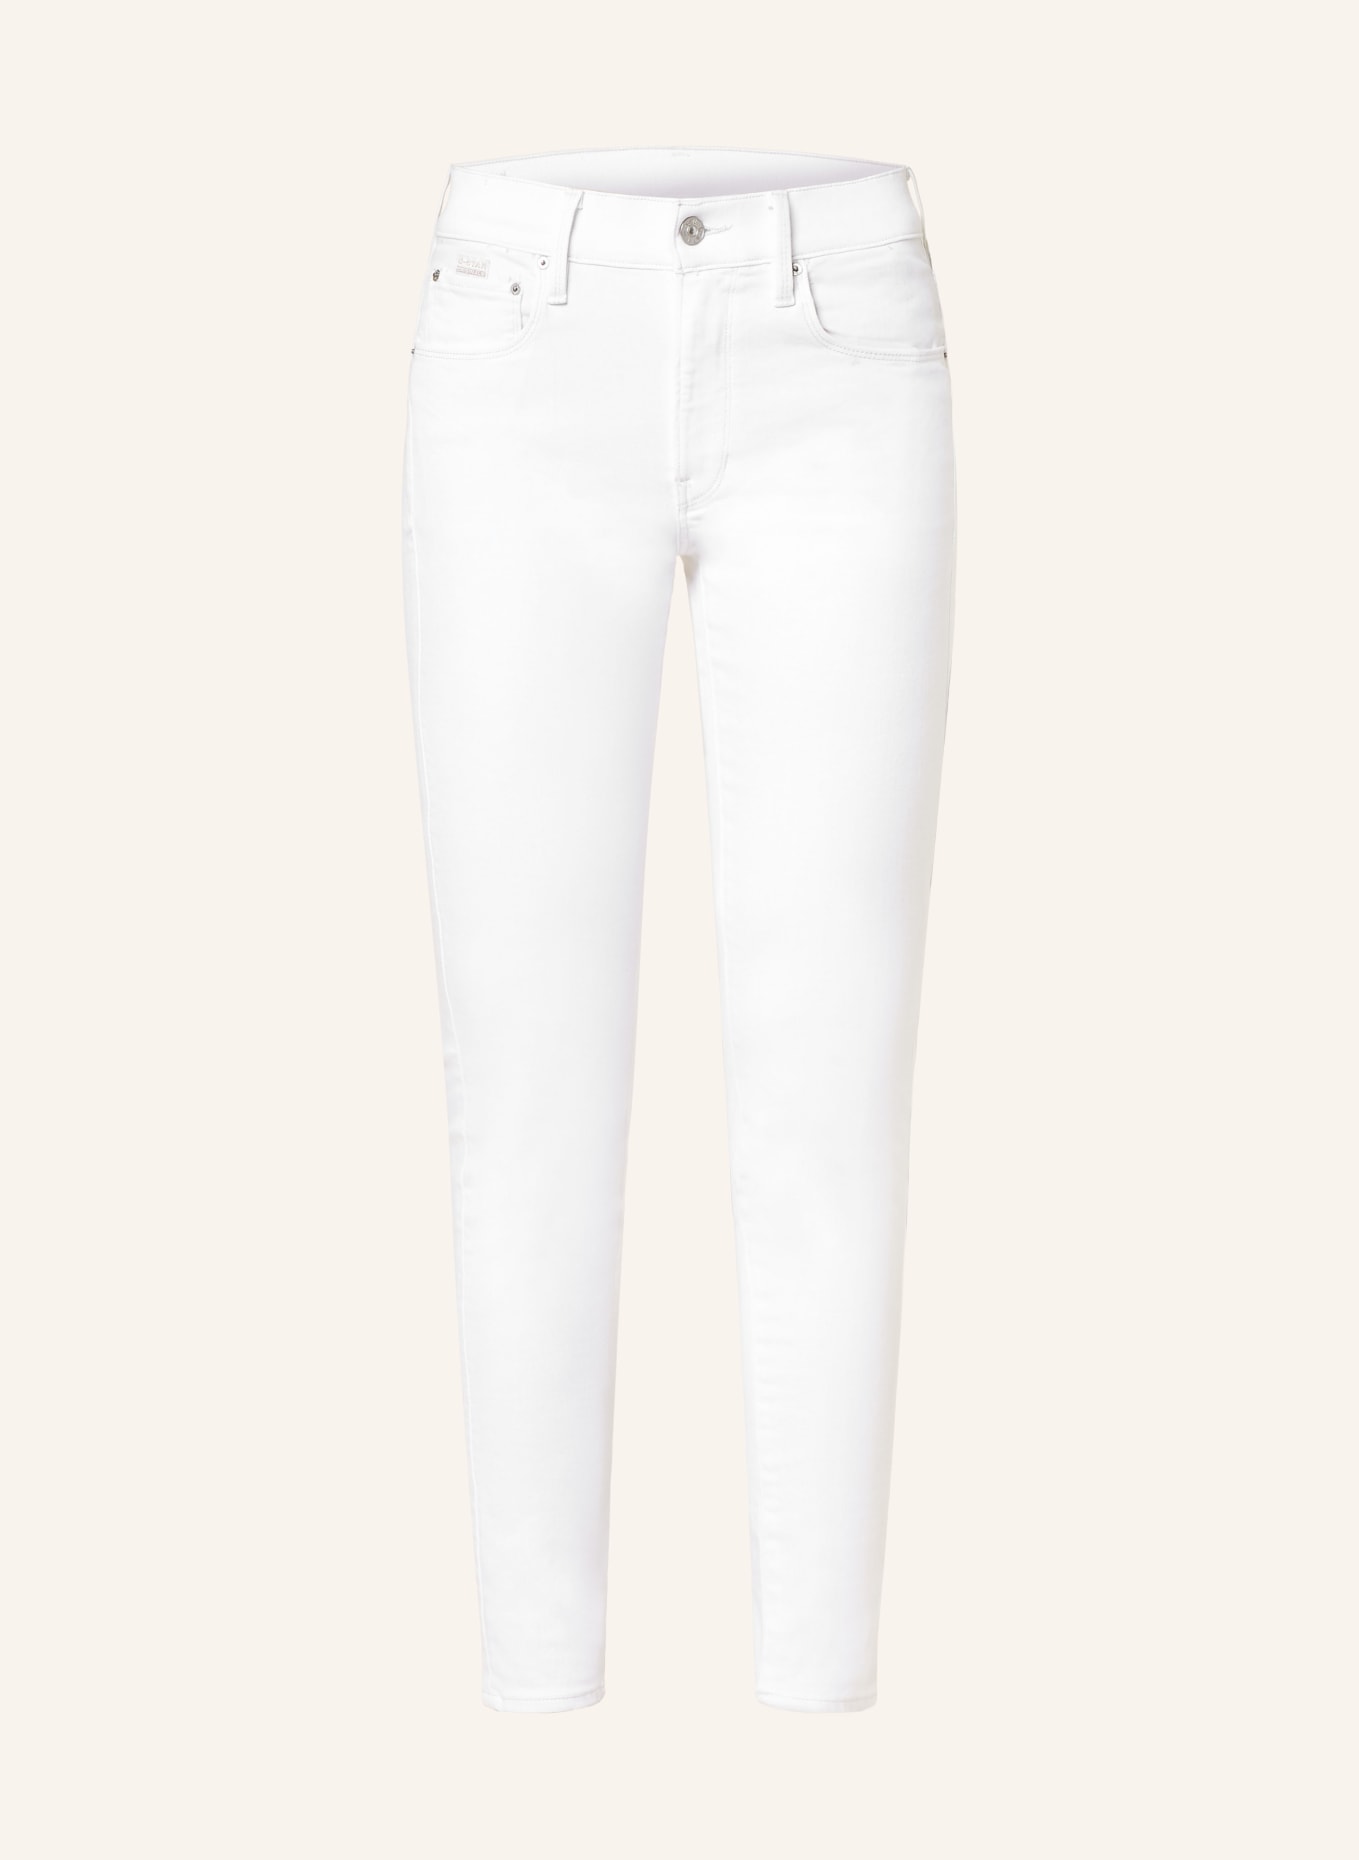 G-Star RAW Skinny jeans, Color: G547 paper white gd (Image 1)